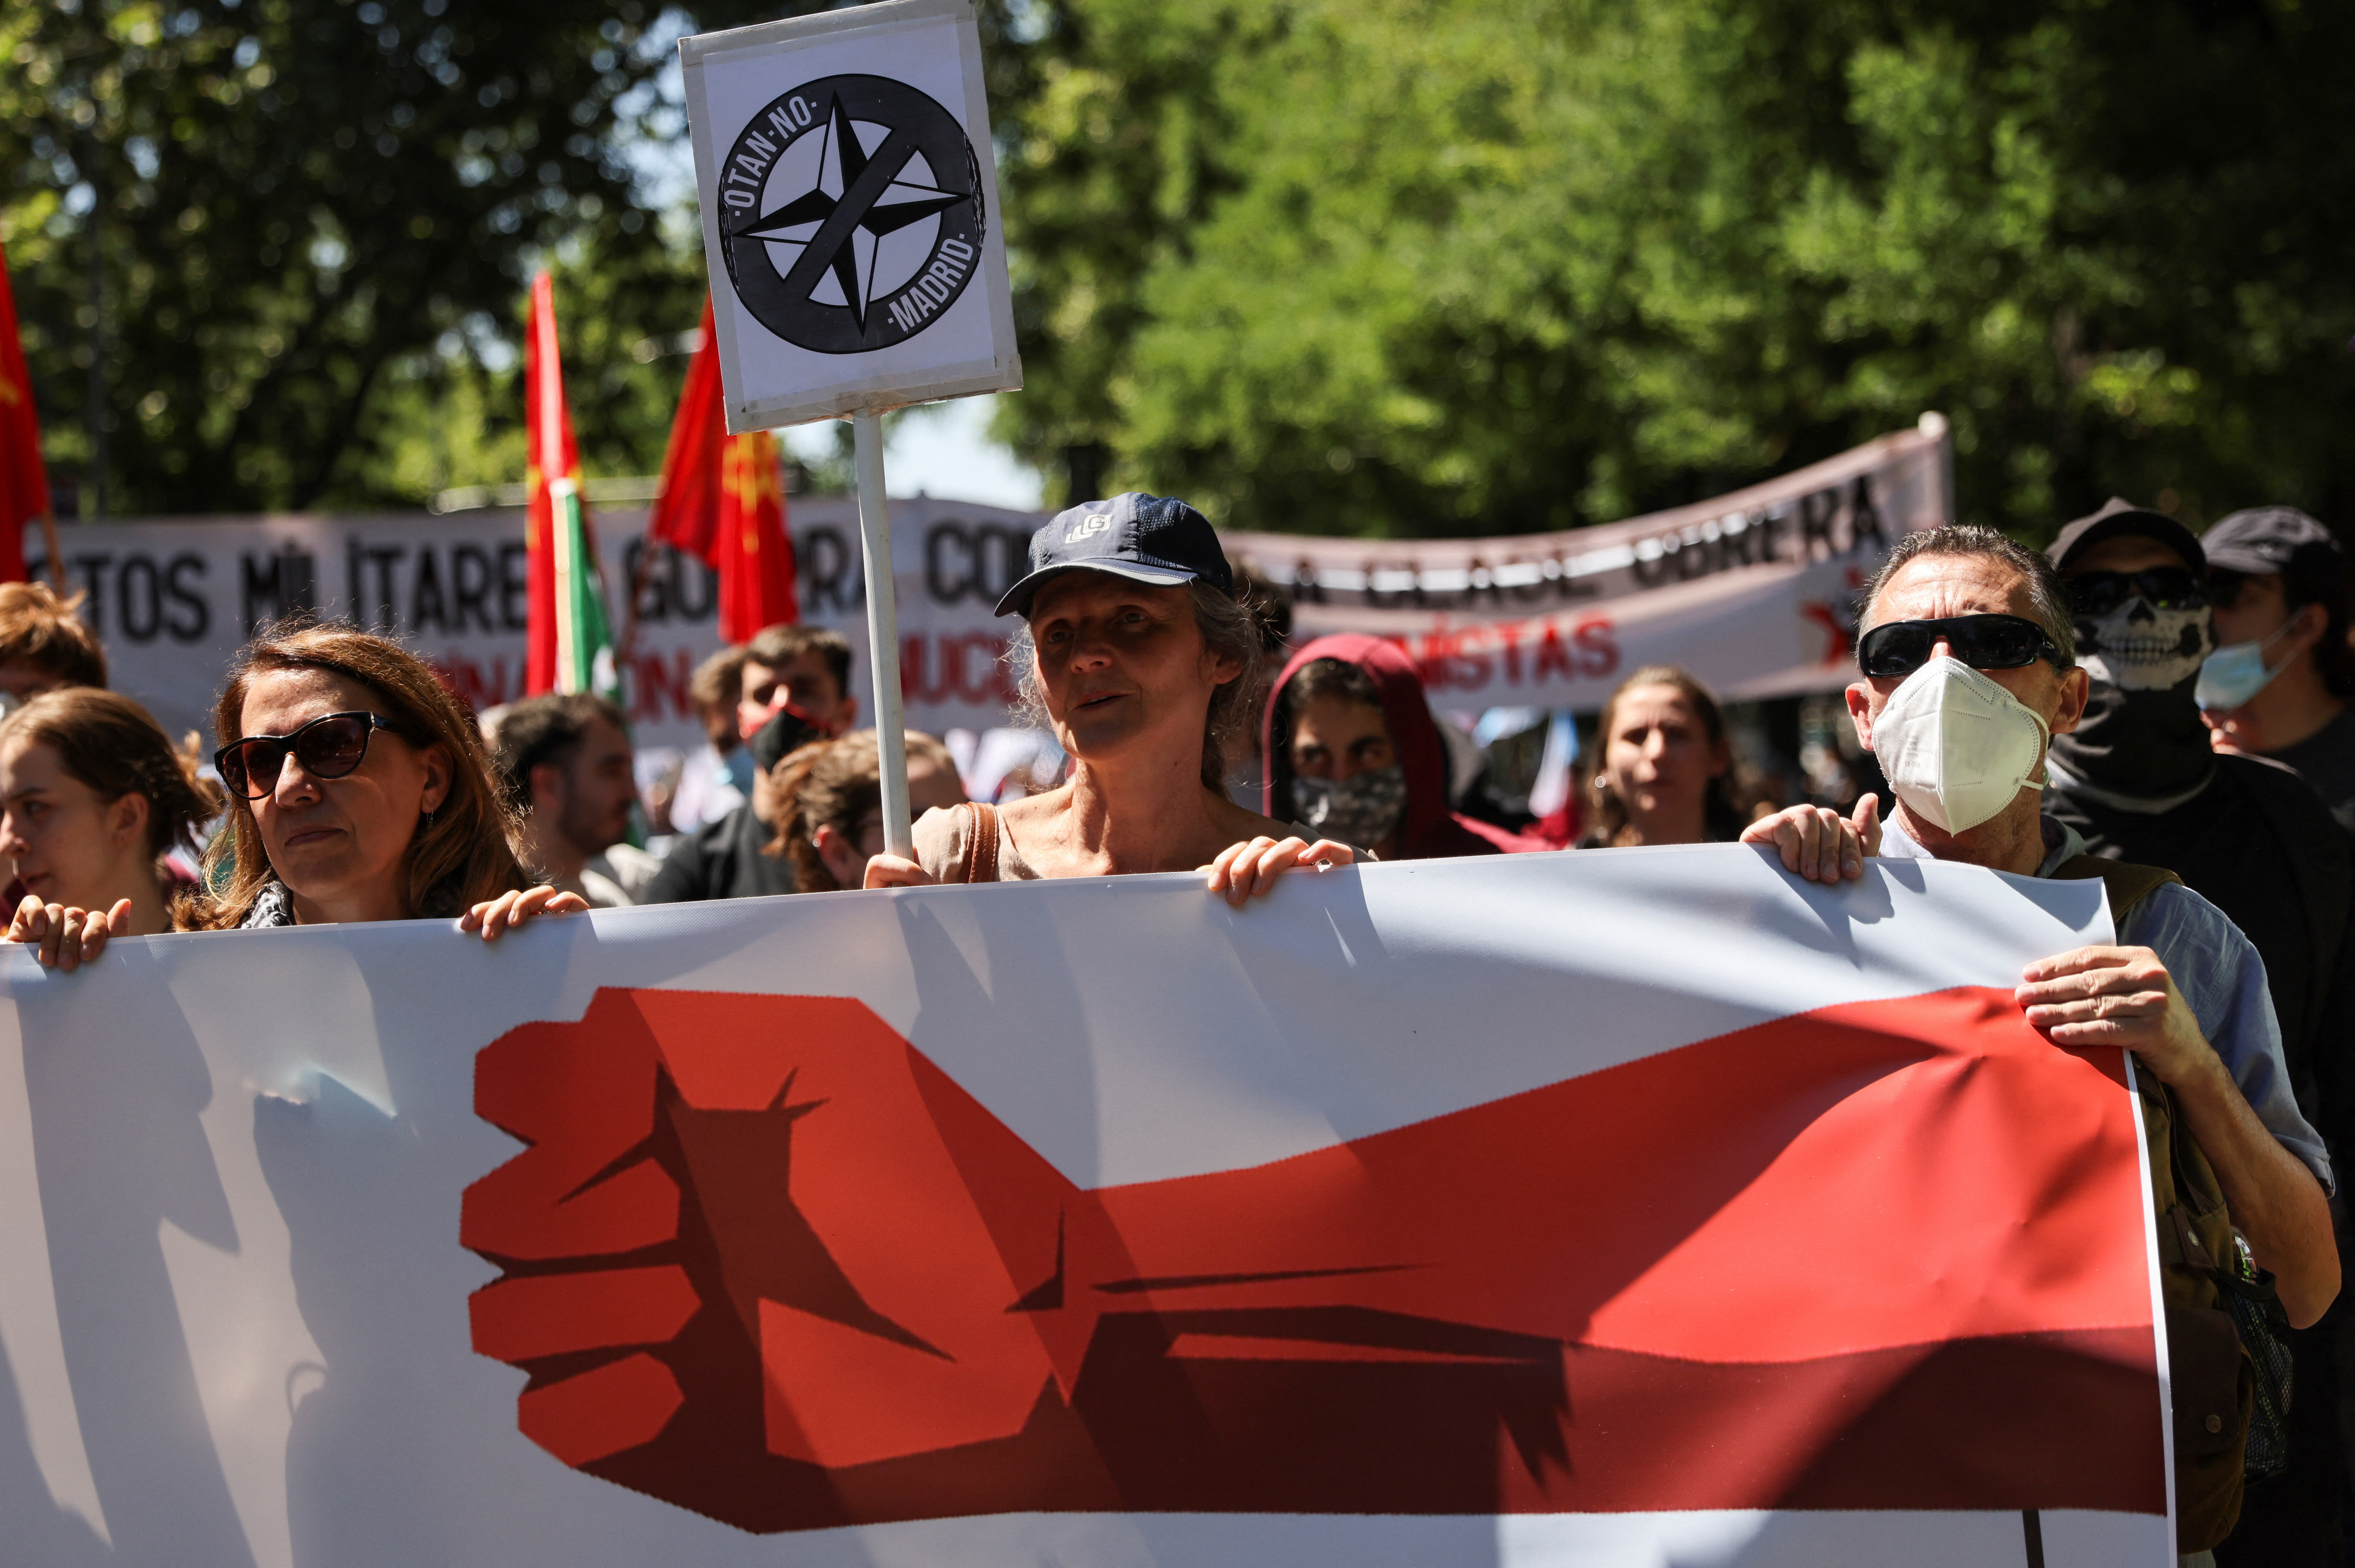 Protesters stage anti-NATO rally in Madrid